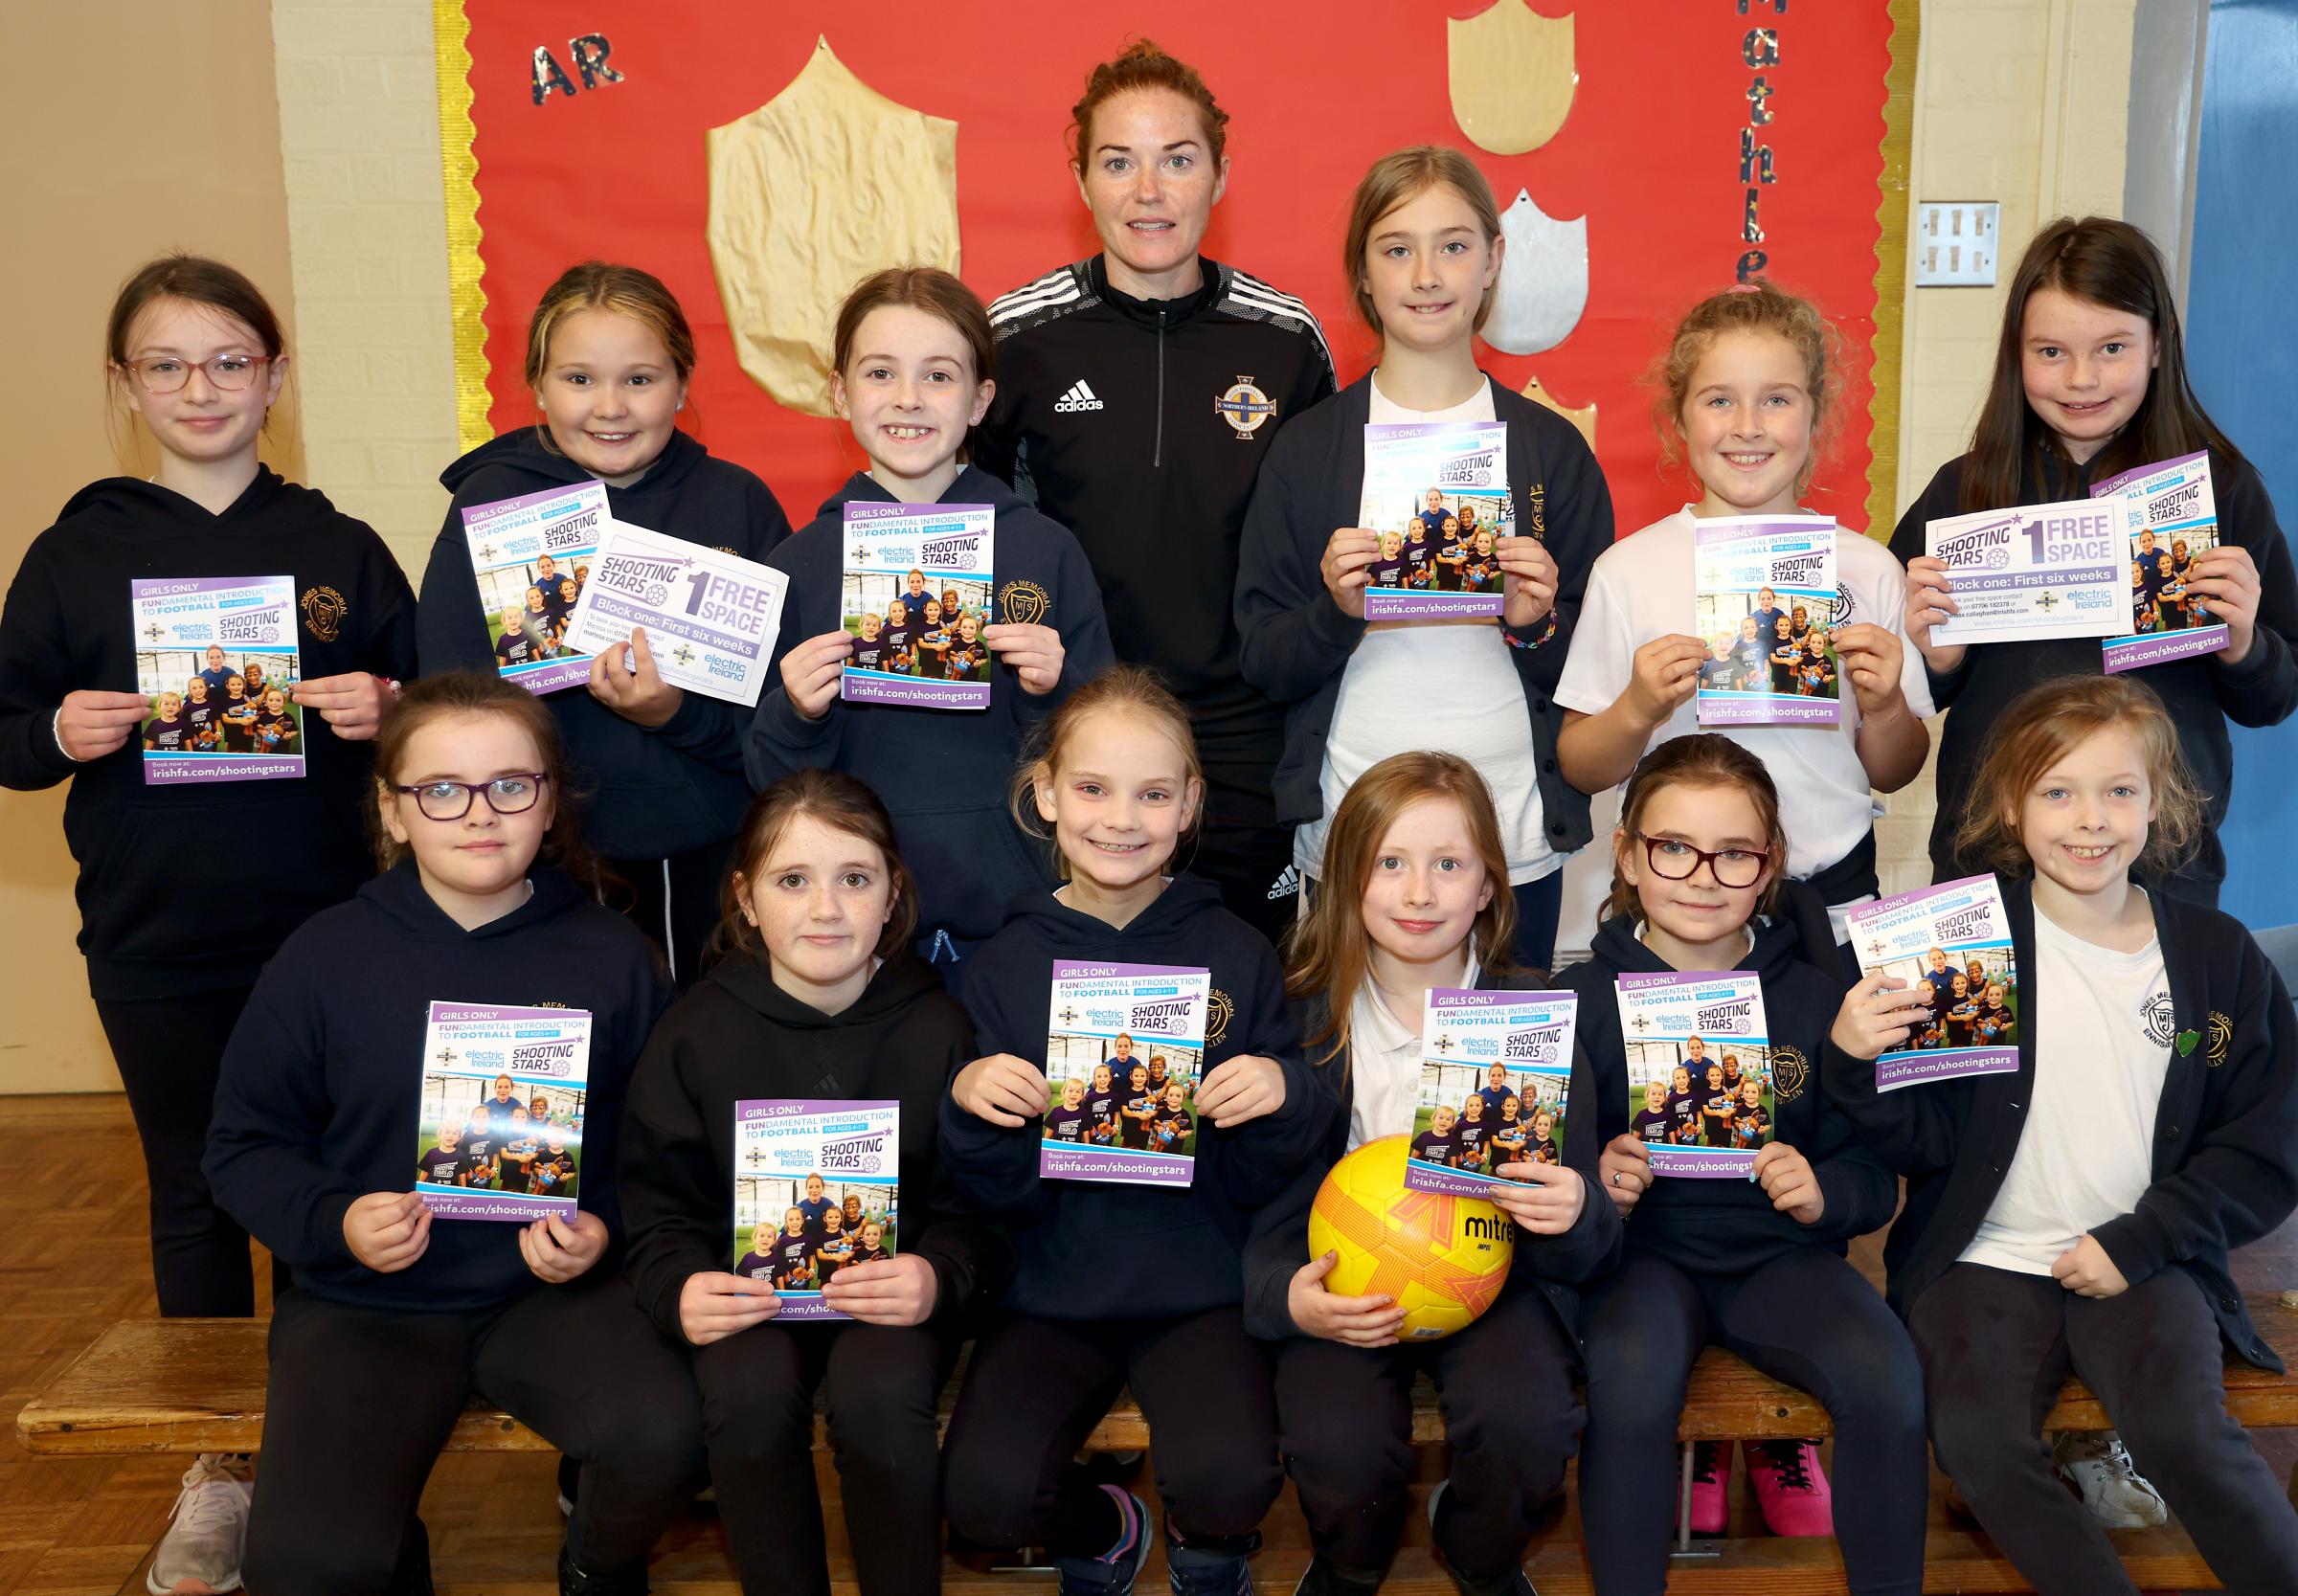 Marissa Callaghan, Northern Ireland Captain and IFA Diversification Officer, with P6 pupils at Jones Memorial Primary School.